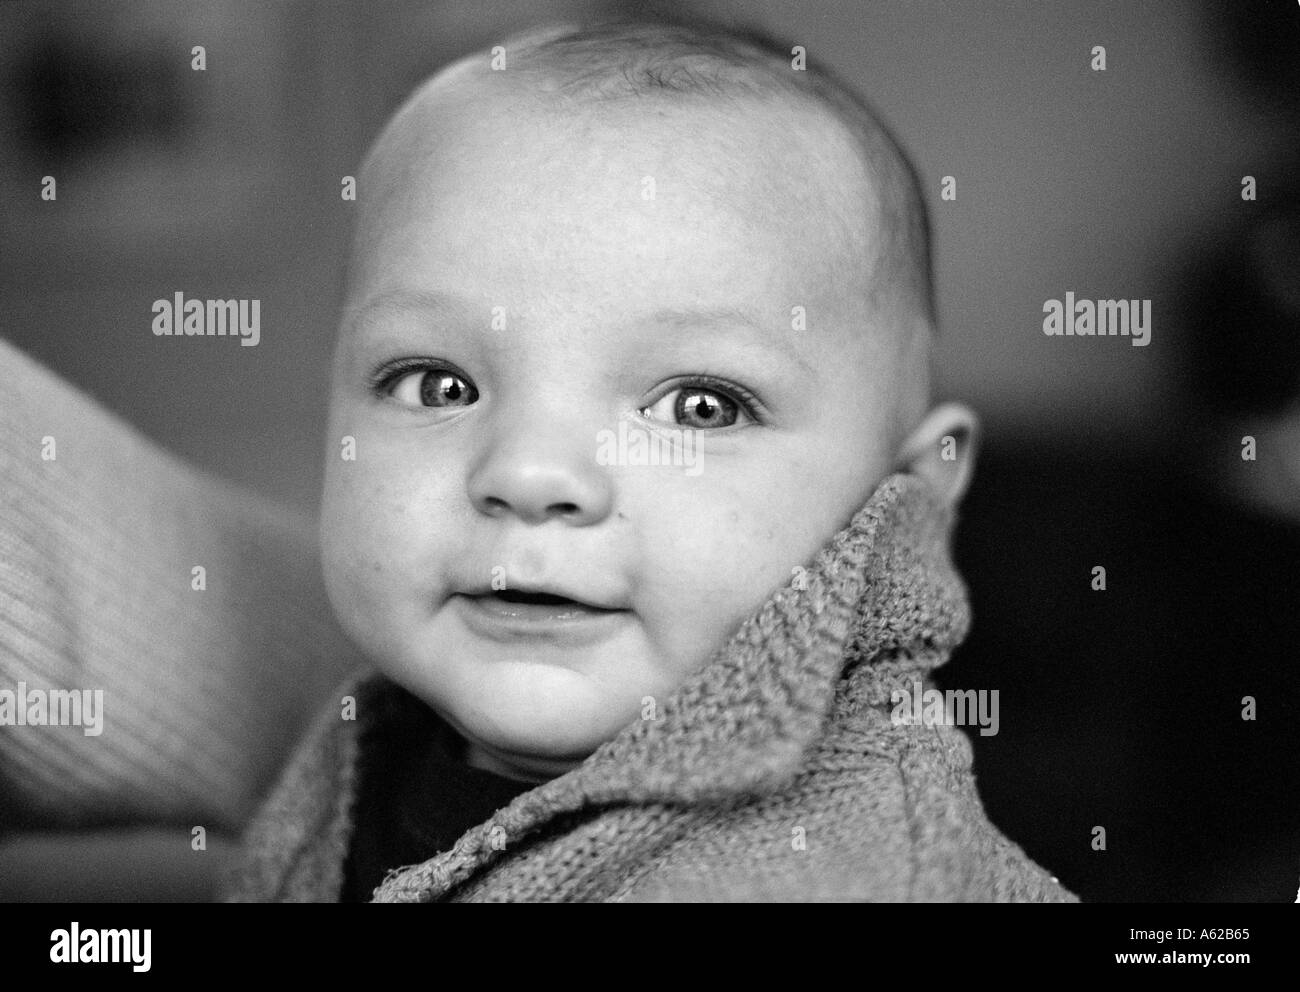 head and shoulder crop of baby with a high collar Stock Photo